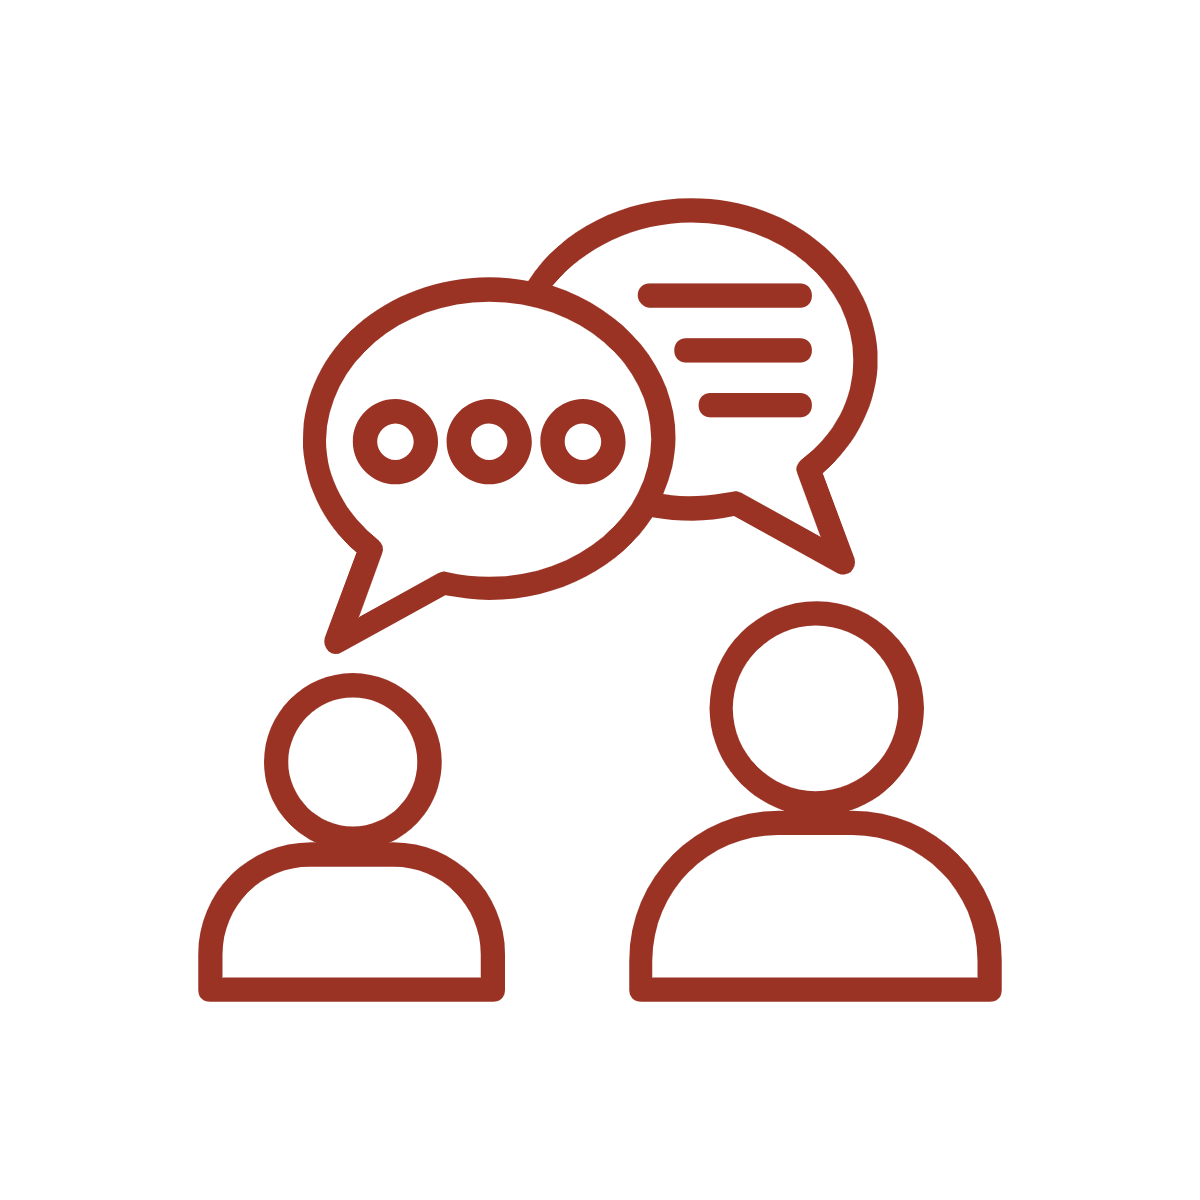 Dark red icon of two people talking with talking bubbles above their heads.